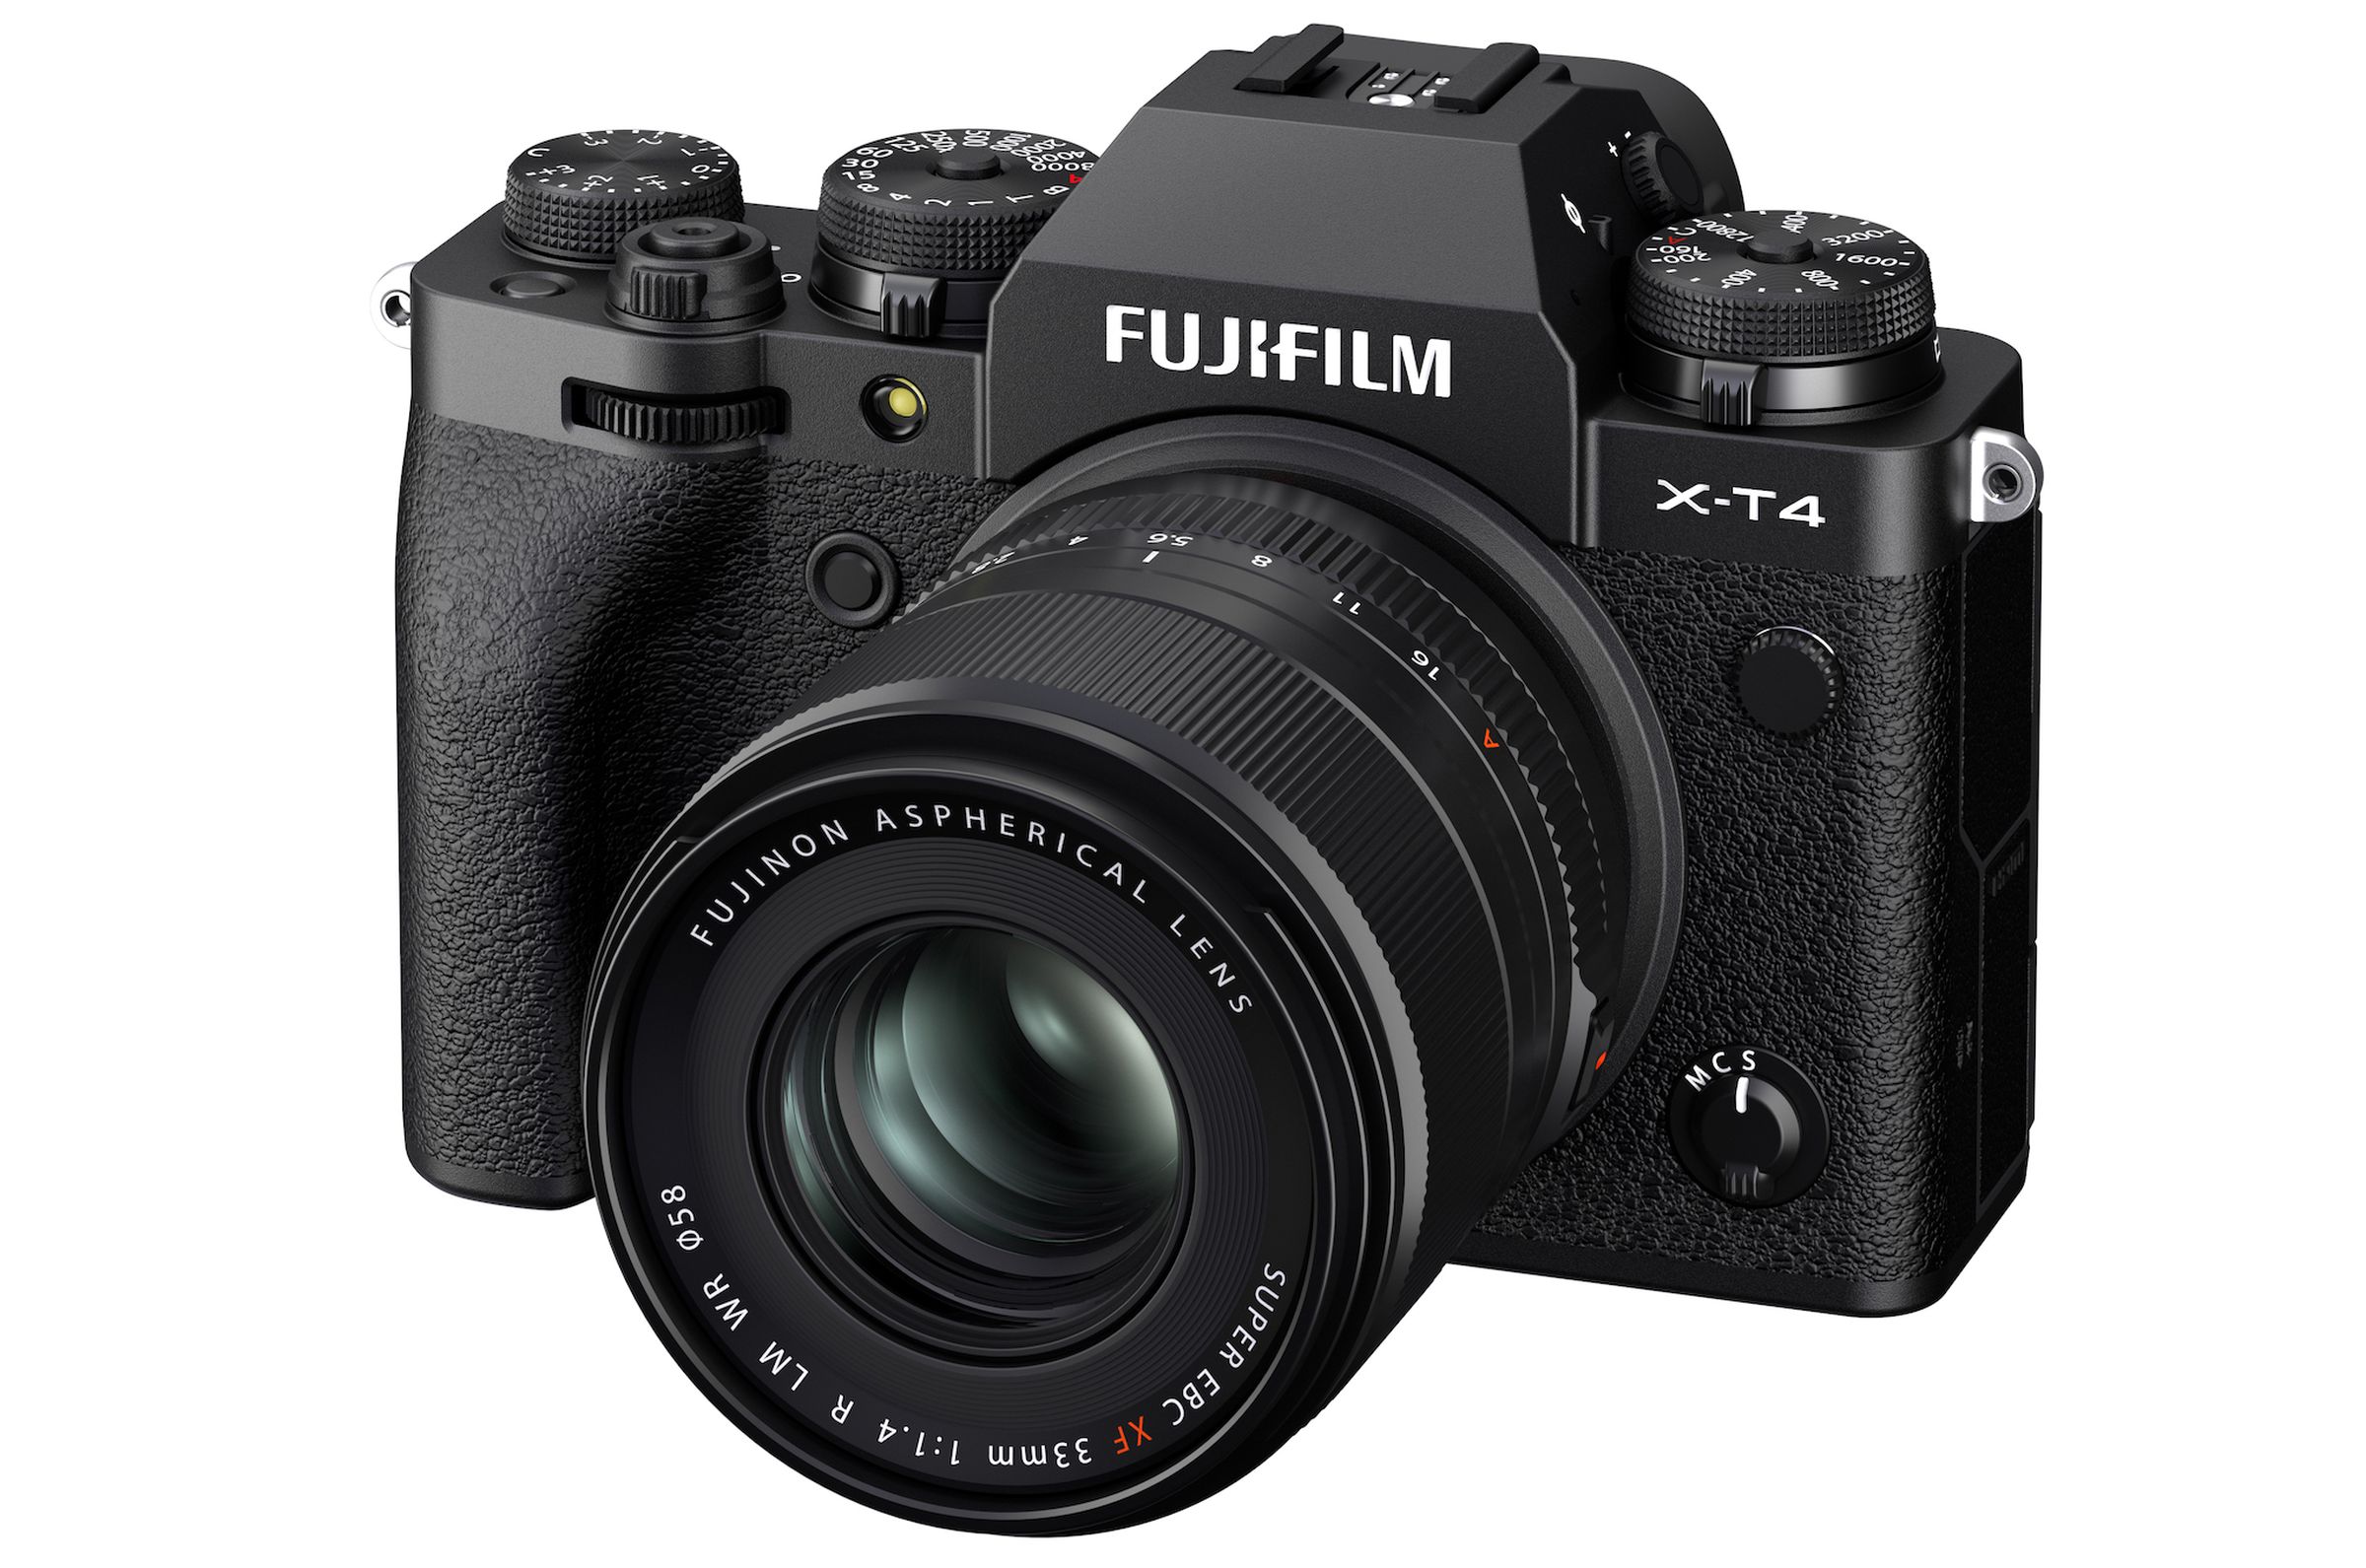 The new Fujinon XF33mm f/1.4 lens shown on an X-T4 body.